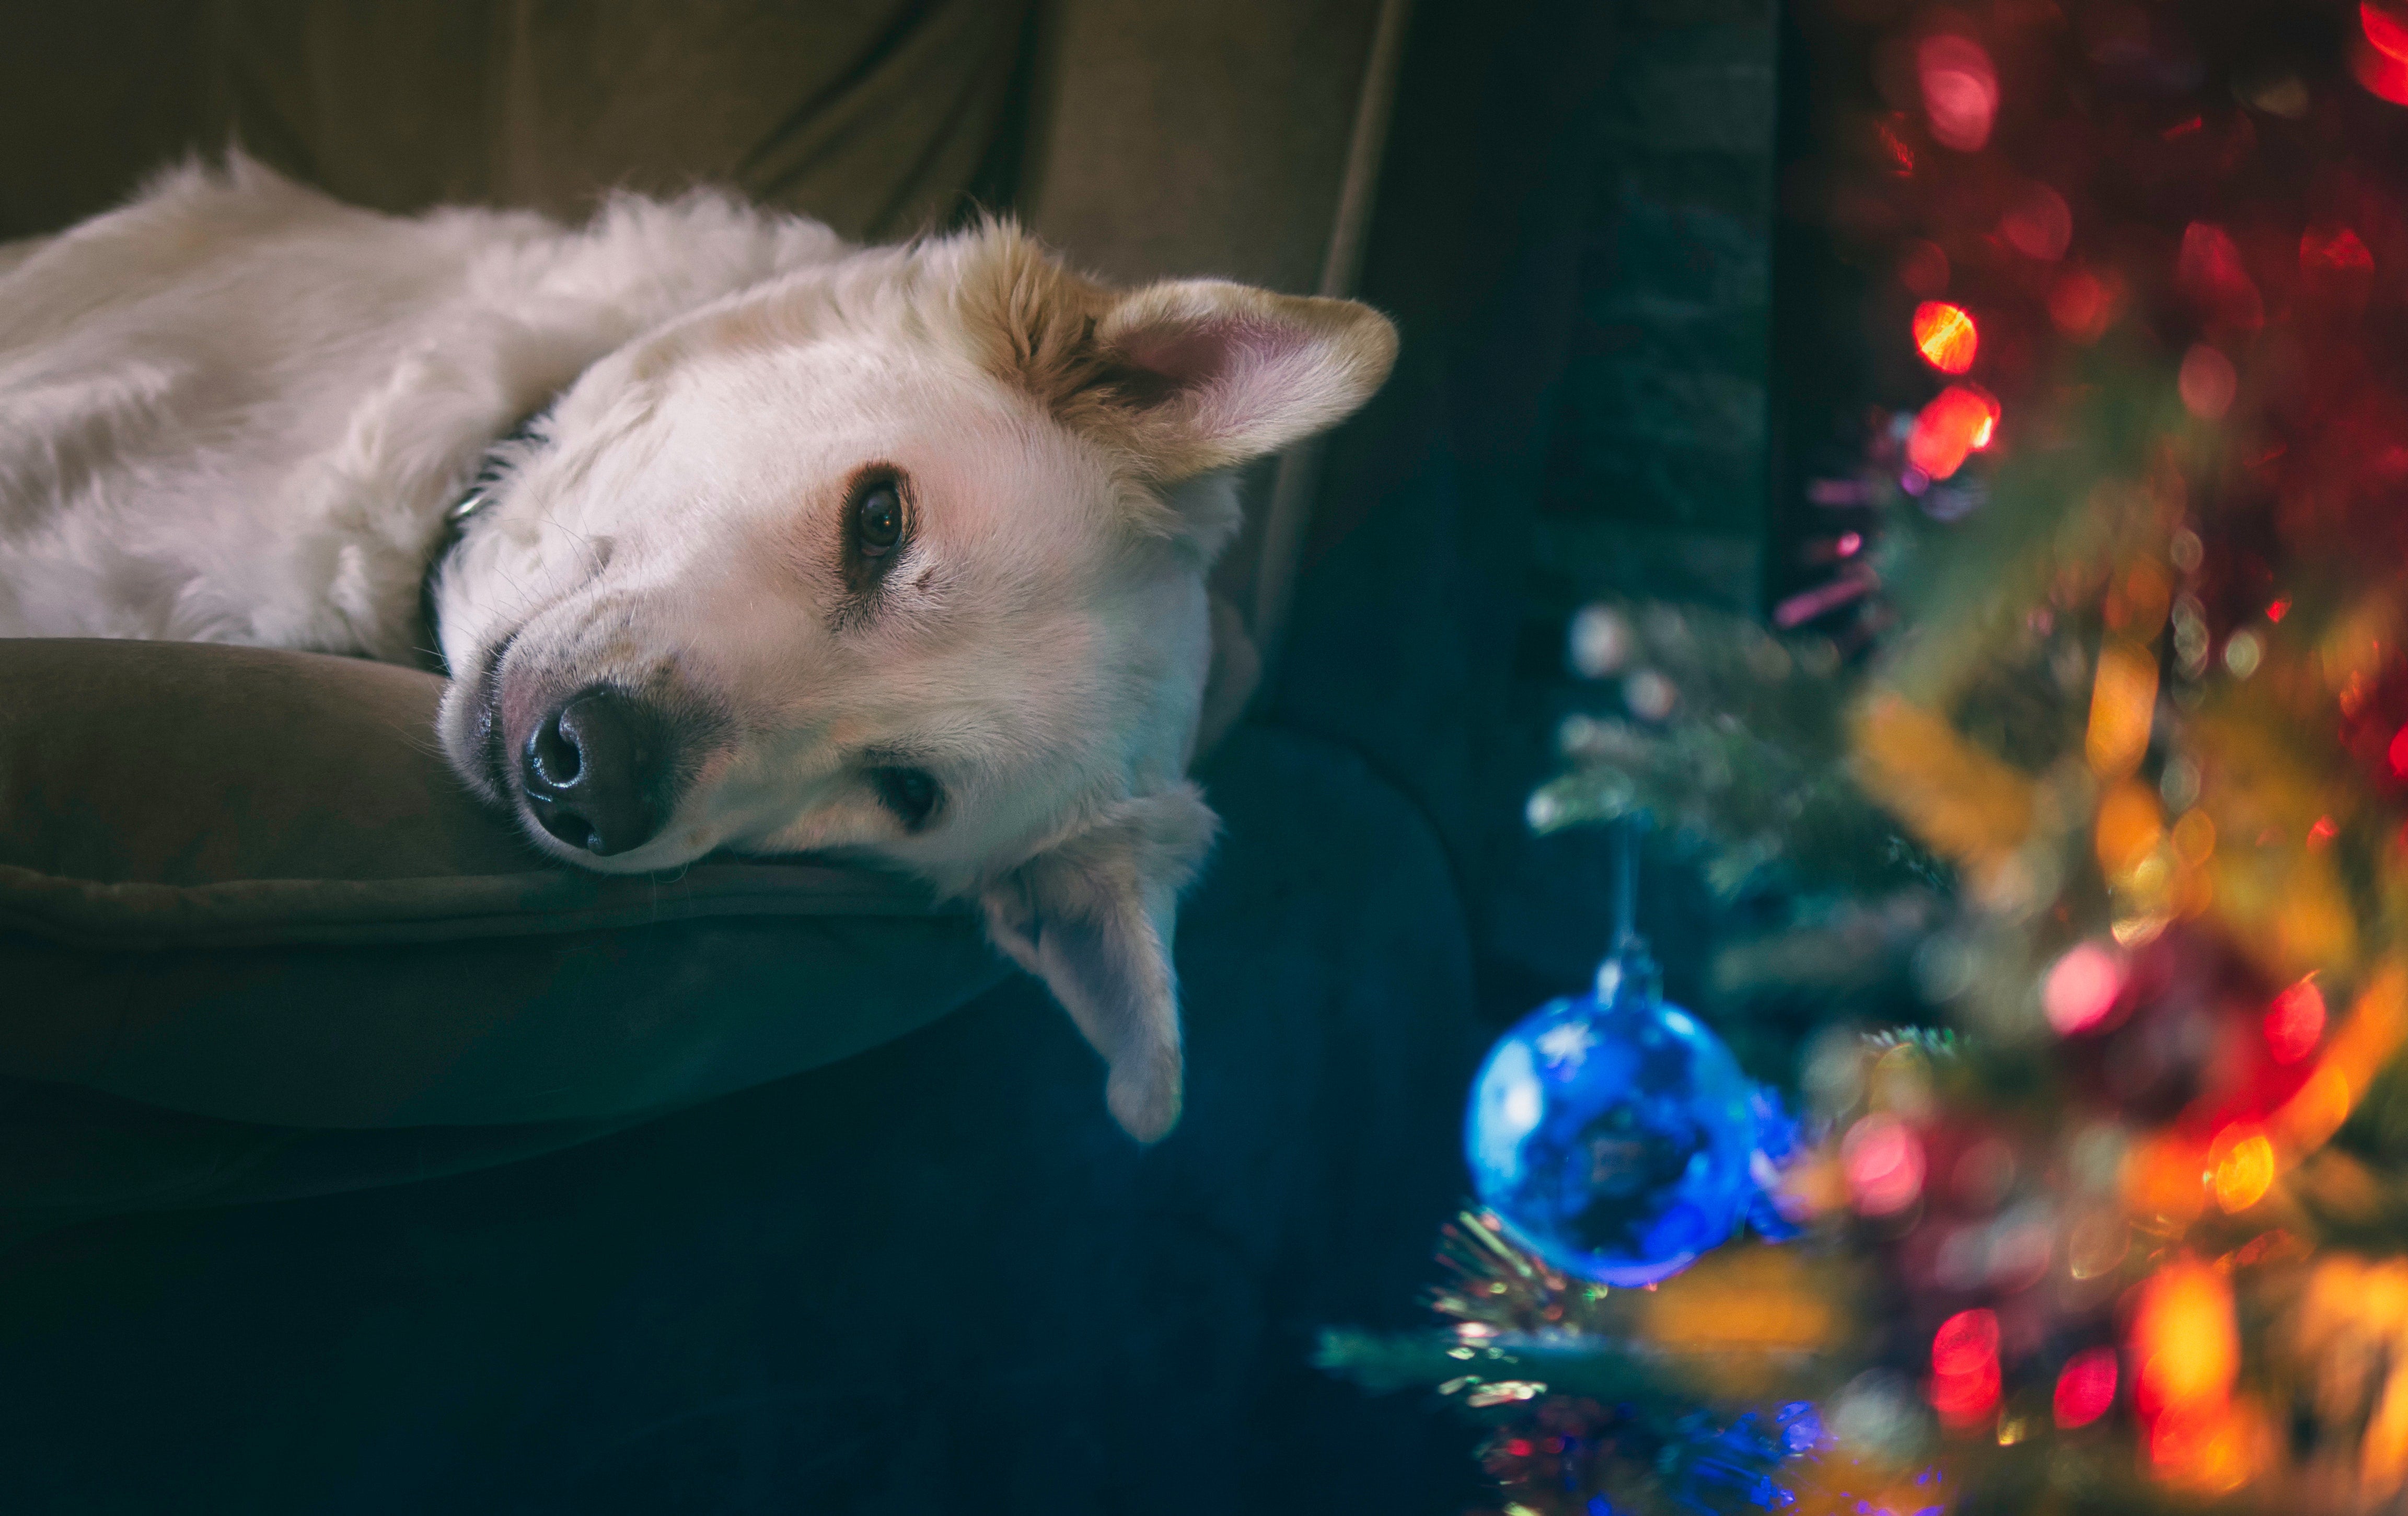 Cooking up a Christmas doggy dinner? Here’s what your dog can and can’t eat over the festive period